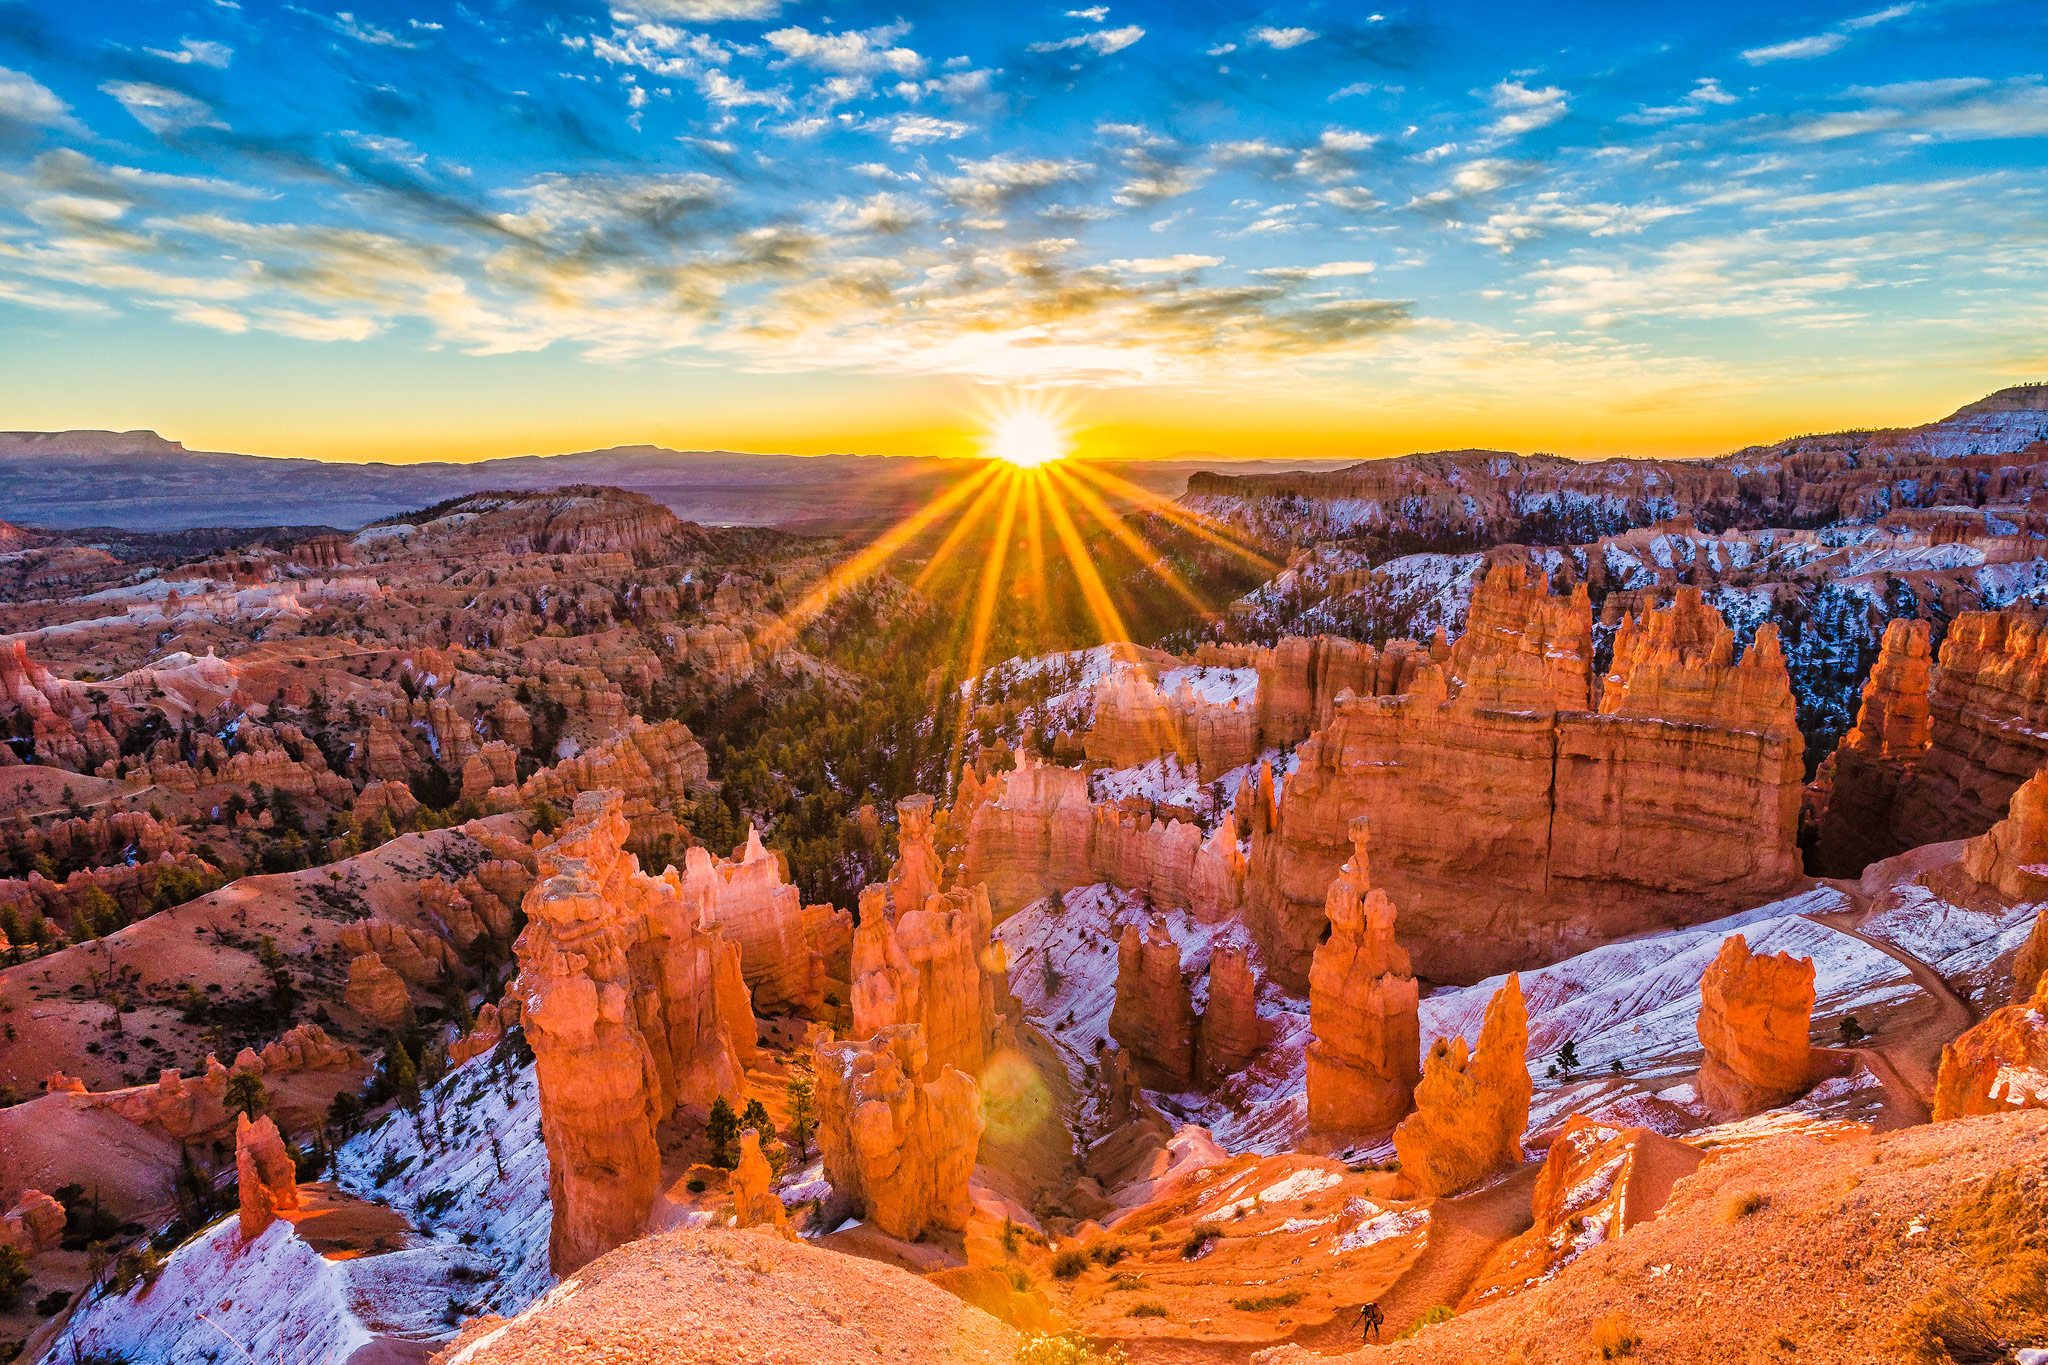 Wallpapers sky Bryce Canyon nature on the desktop